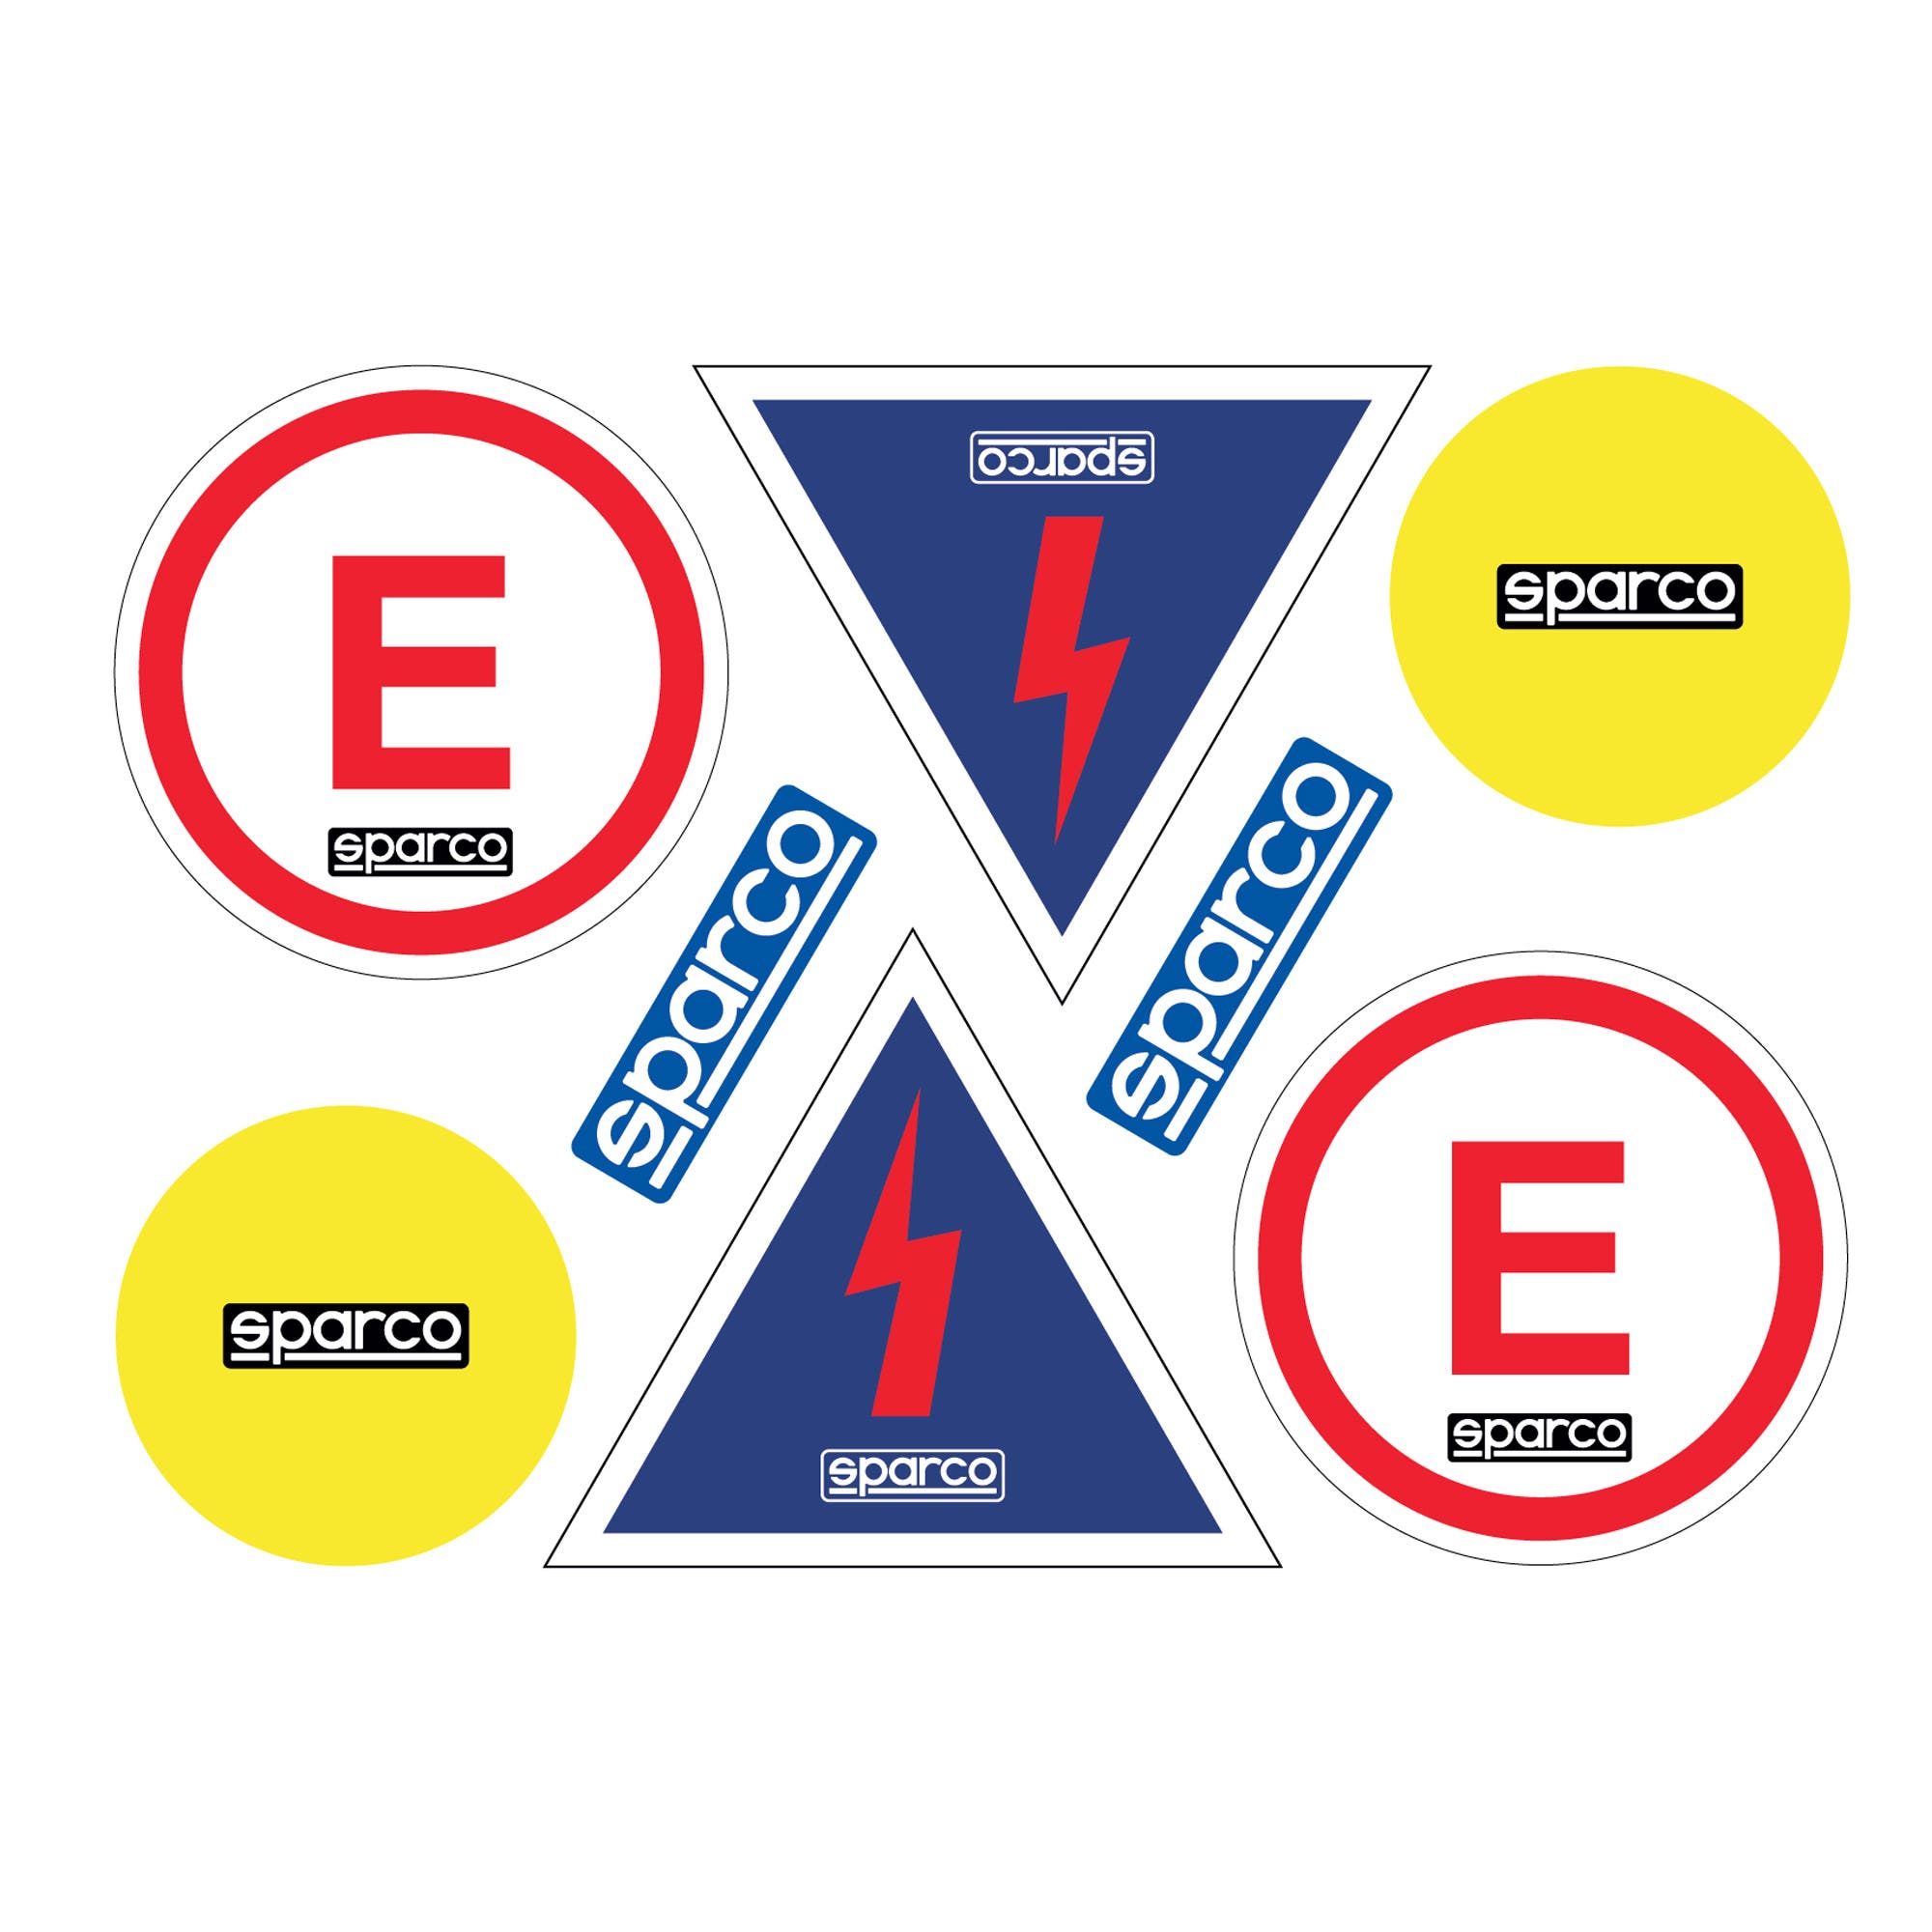 KIT OF 8 STICKERS - Sparco Shop